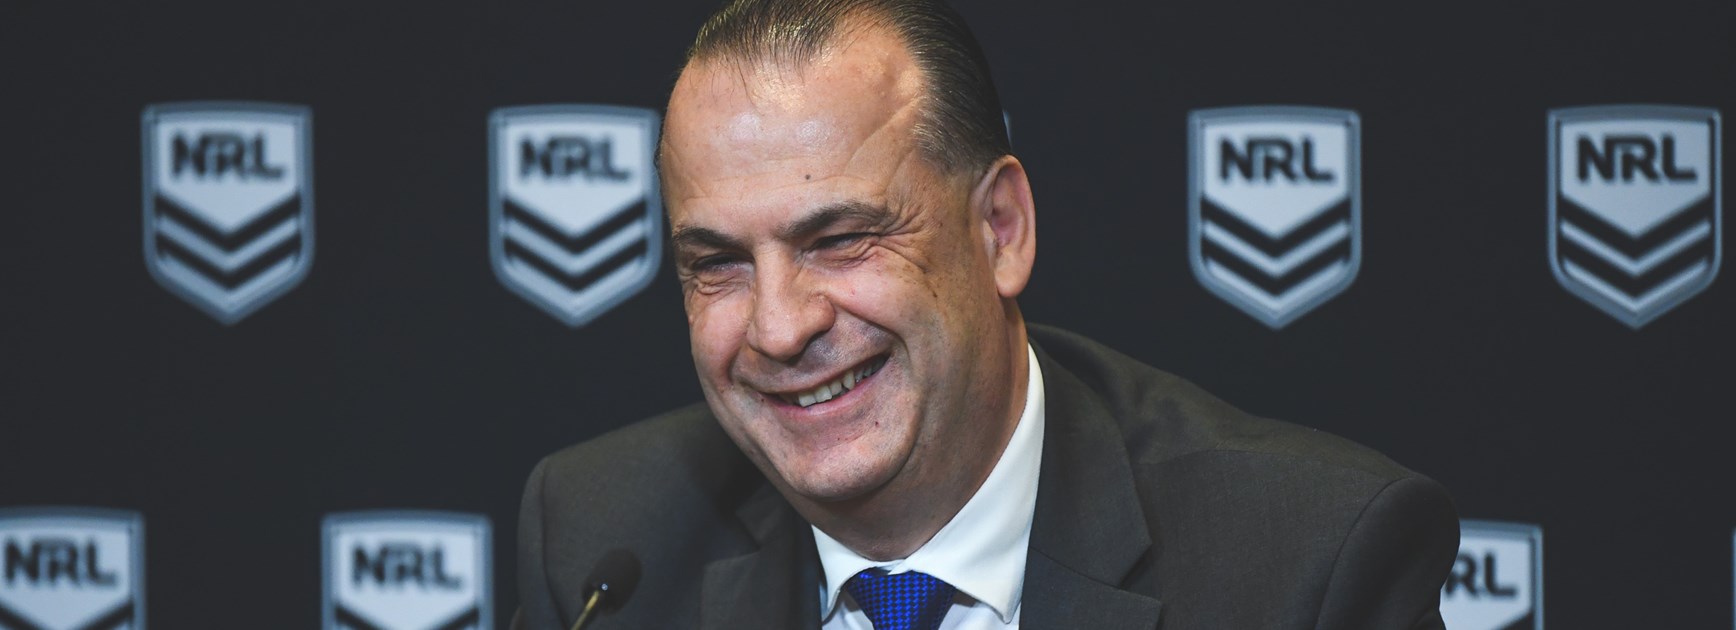 NRL announces rule changes to make game more entertaining